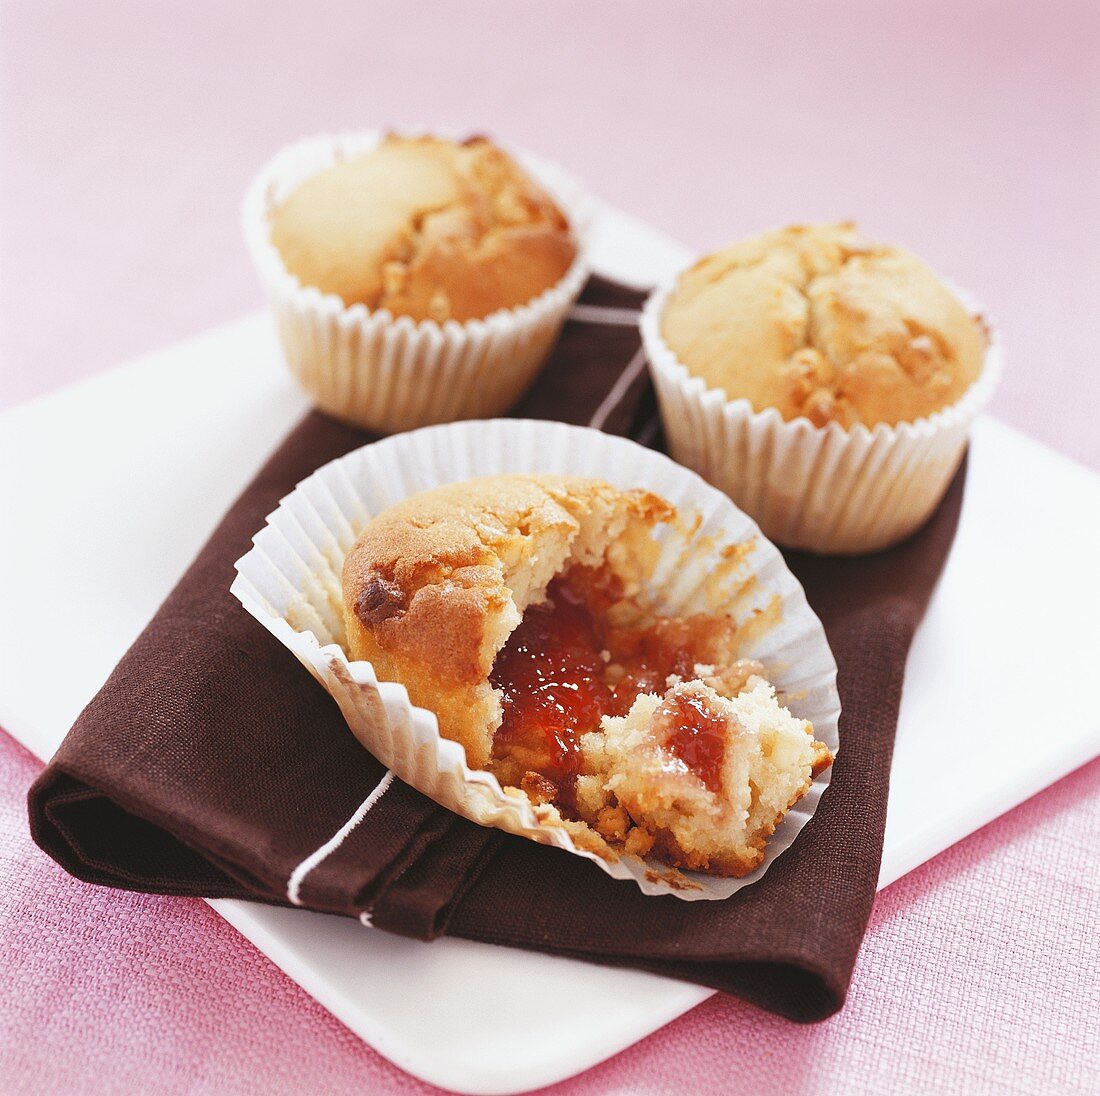 Muffins with strawberry jam and white chocolate